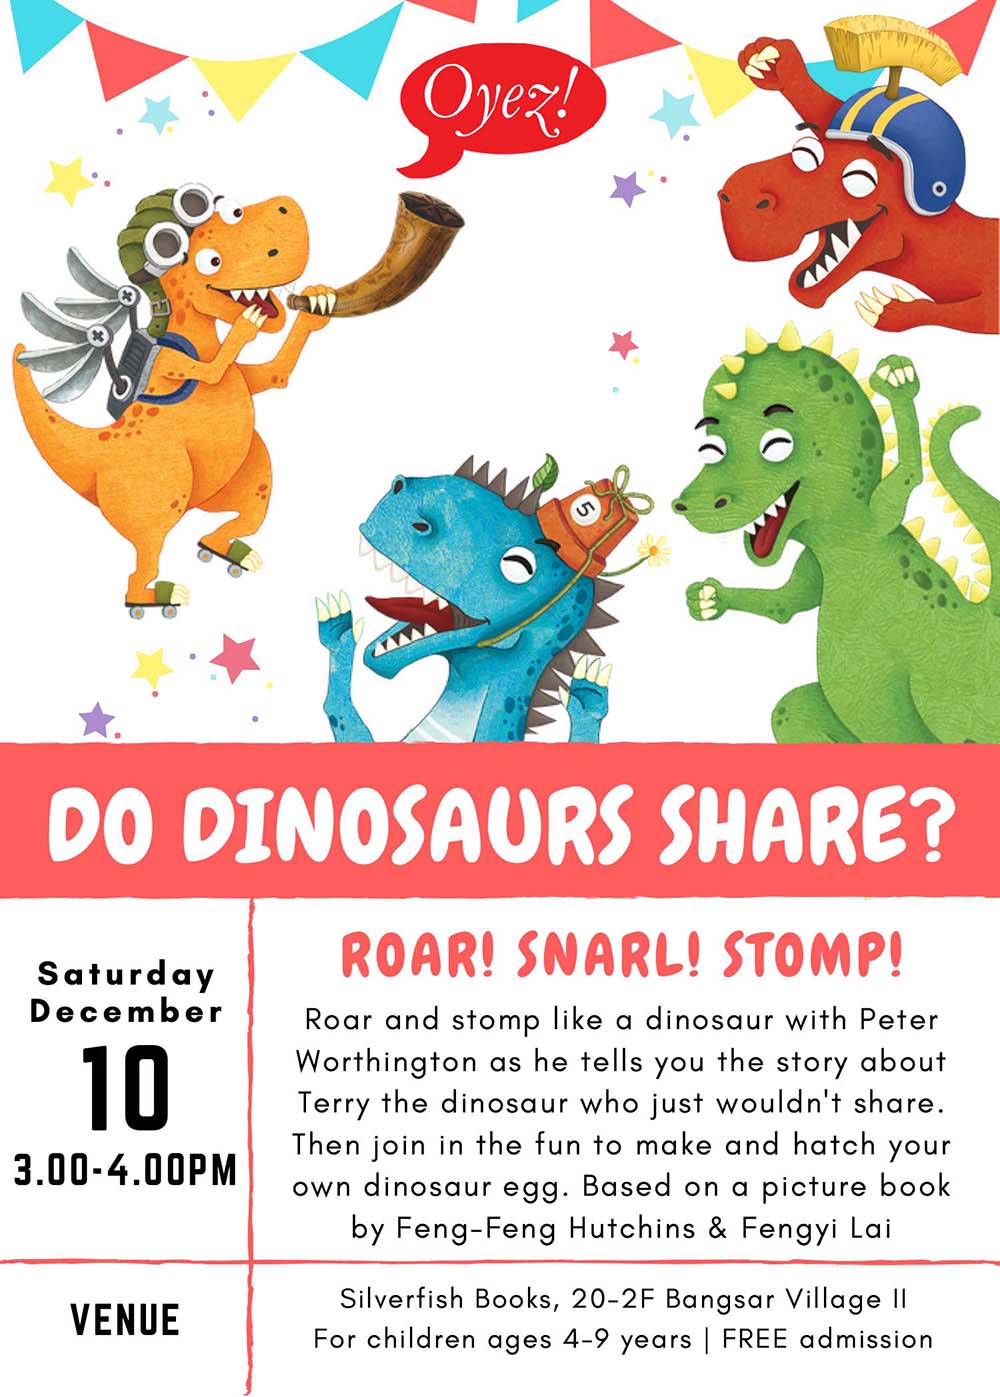 Do Dinosaurs Share? - storytime based on children's picture book by Feng-Feng Hutchins, illustrated by Fengyi Lai